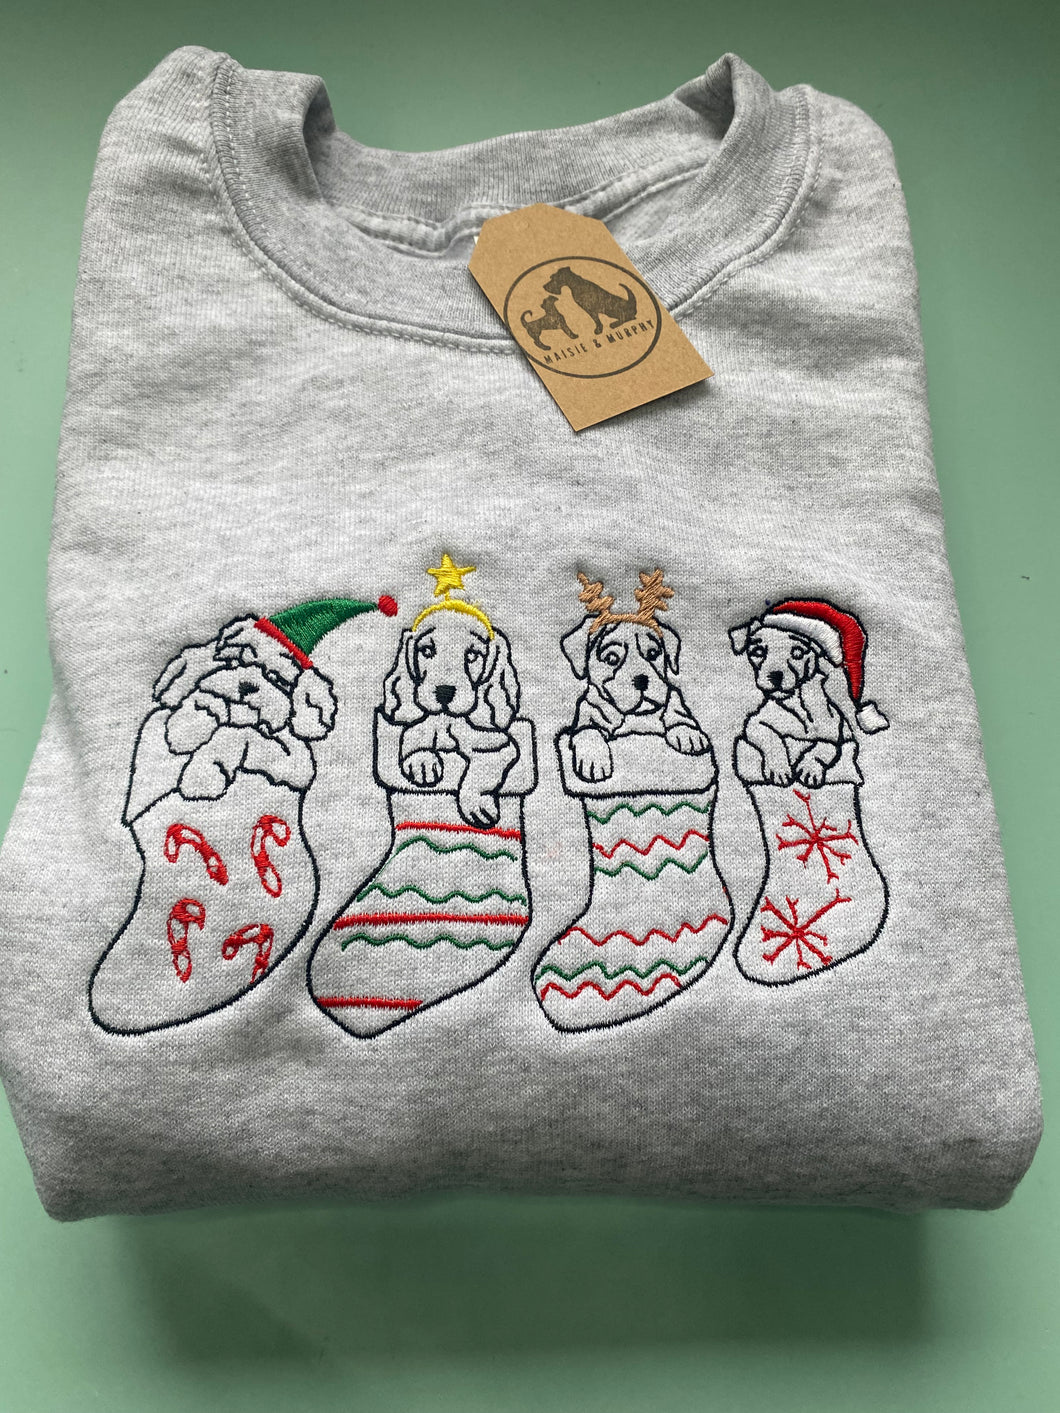 Christmas Puppy Stocking Sweatshirt - Festive dogs sweater for dog lovers